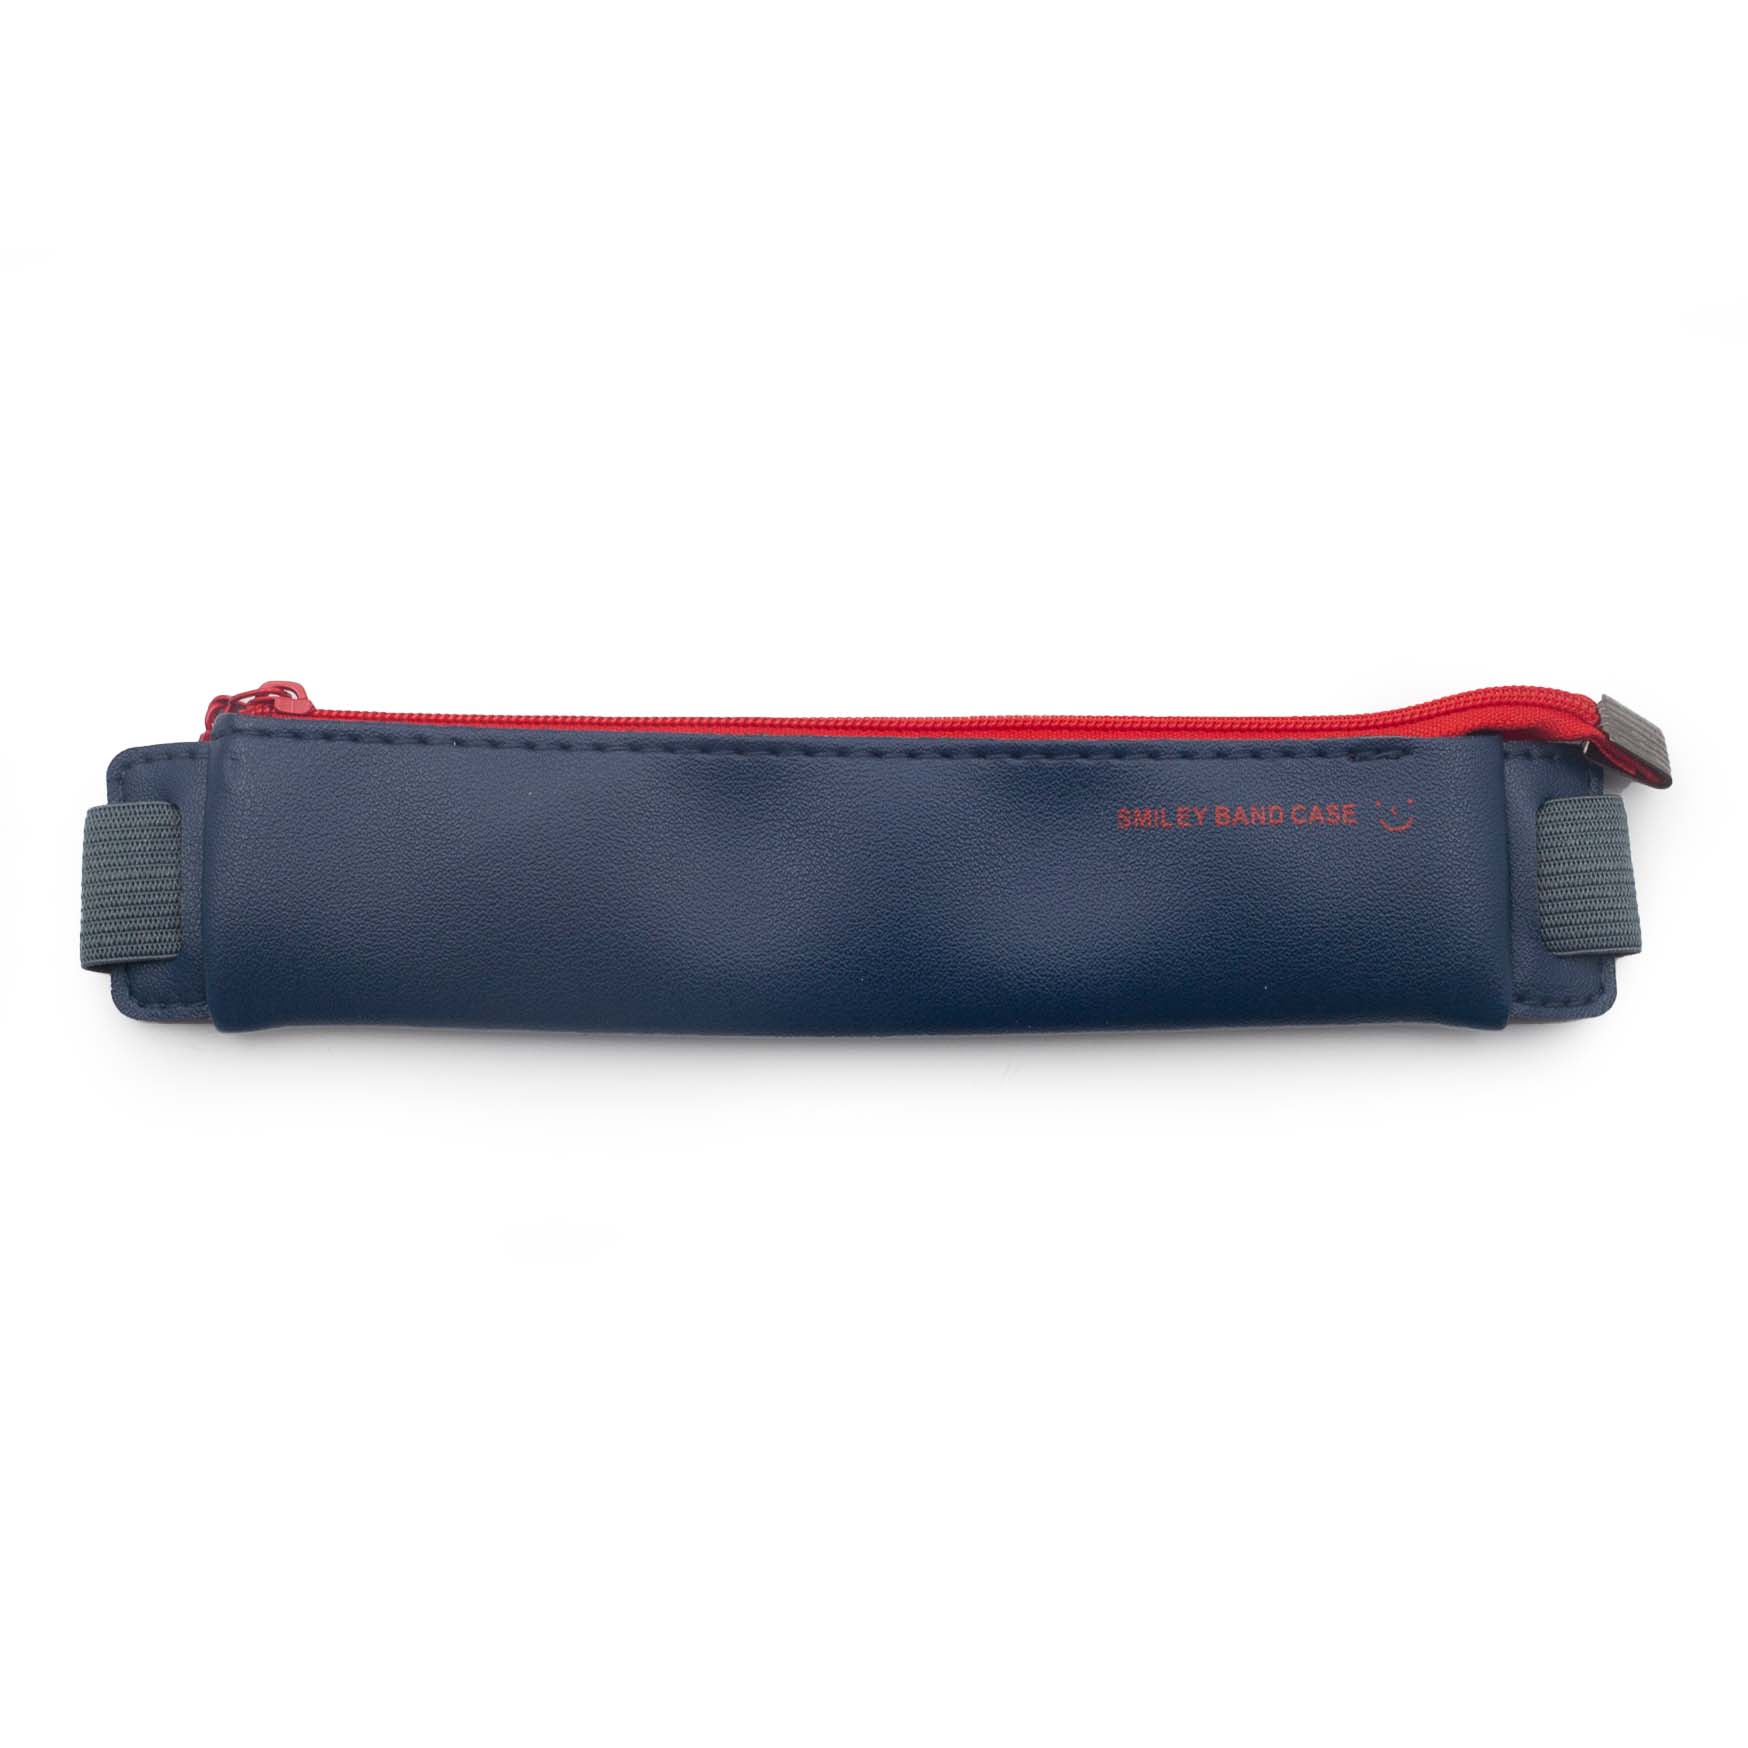 Image shows a navy Blue diary/pencil pouch